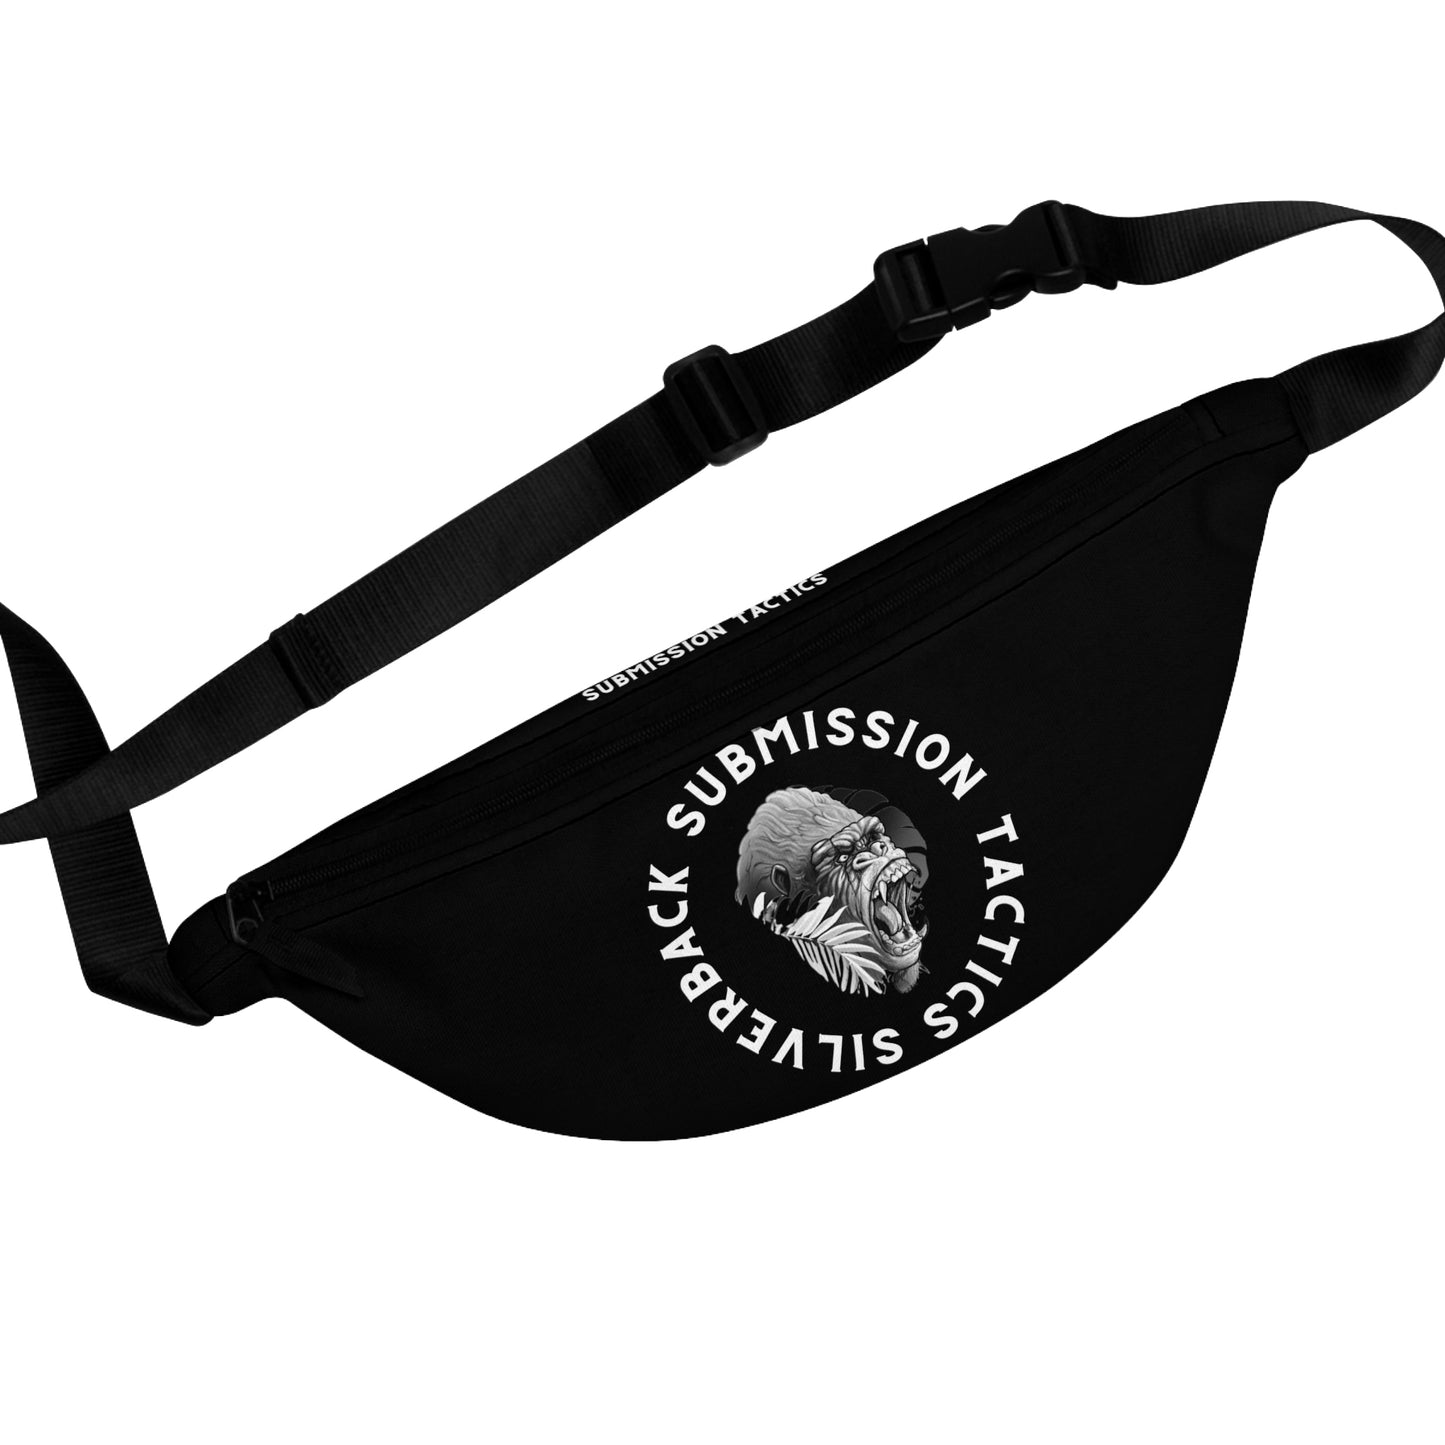 Silverback Submission Tactics Fanny Pack